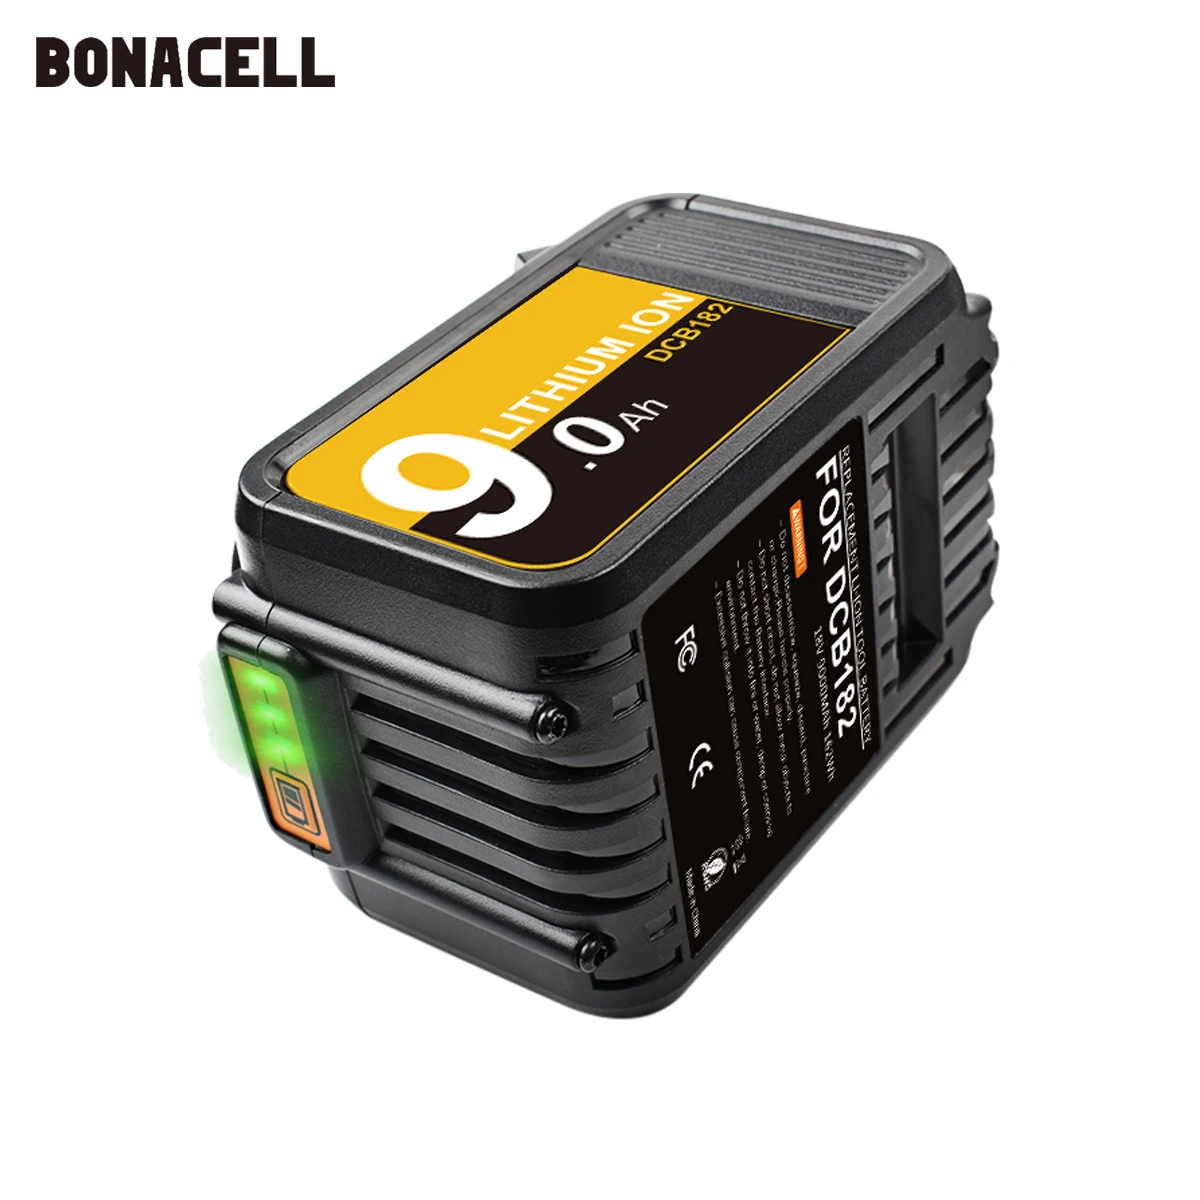 

Bonacell DCB184 18V 9.0Ah Replacement Battery for Dewalt DCB200 DCB180 DCB181 DCB182 DCB183 DCB185 18V XR Lithium-Ion Battery